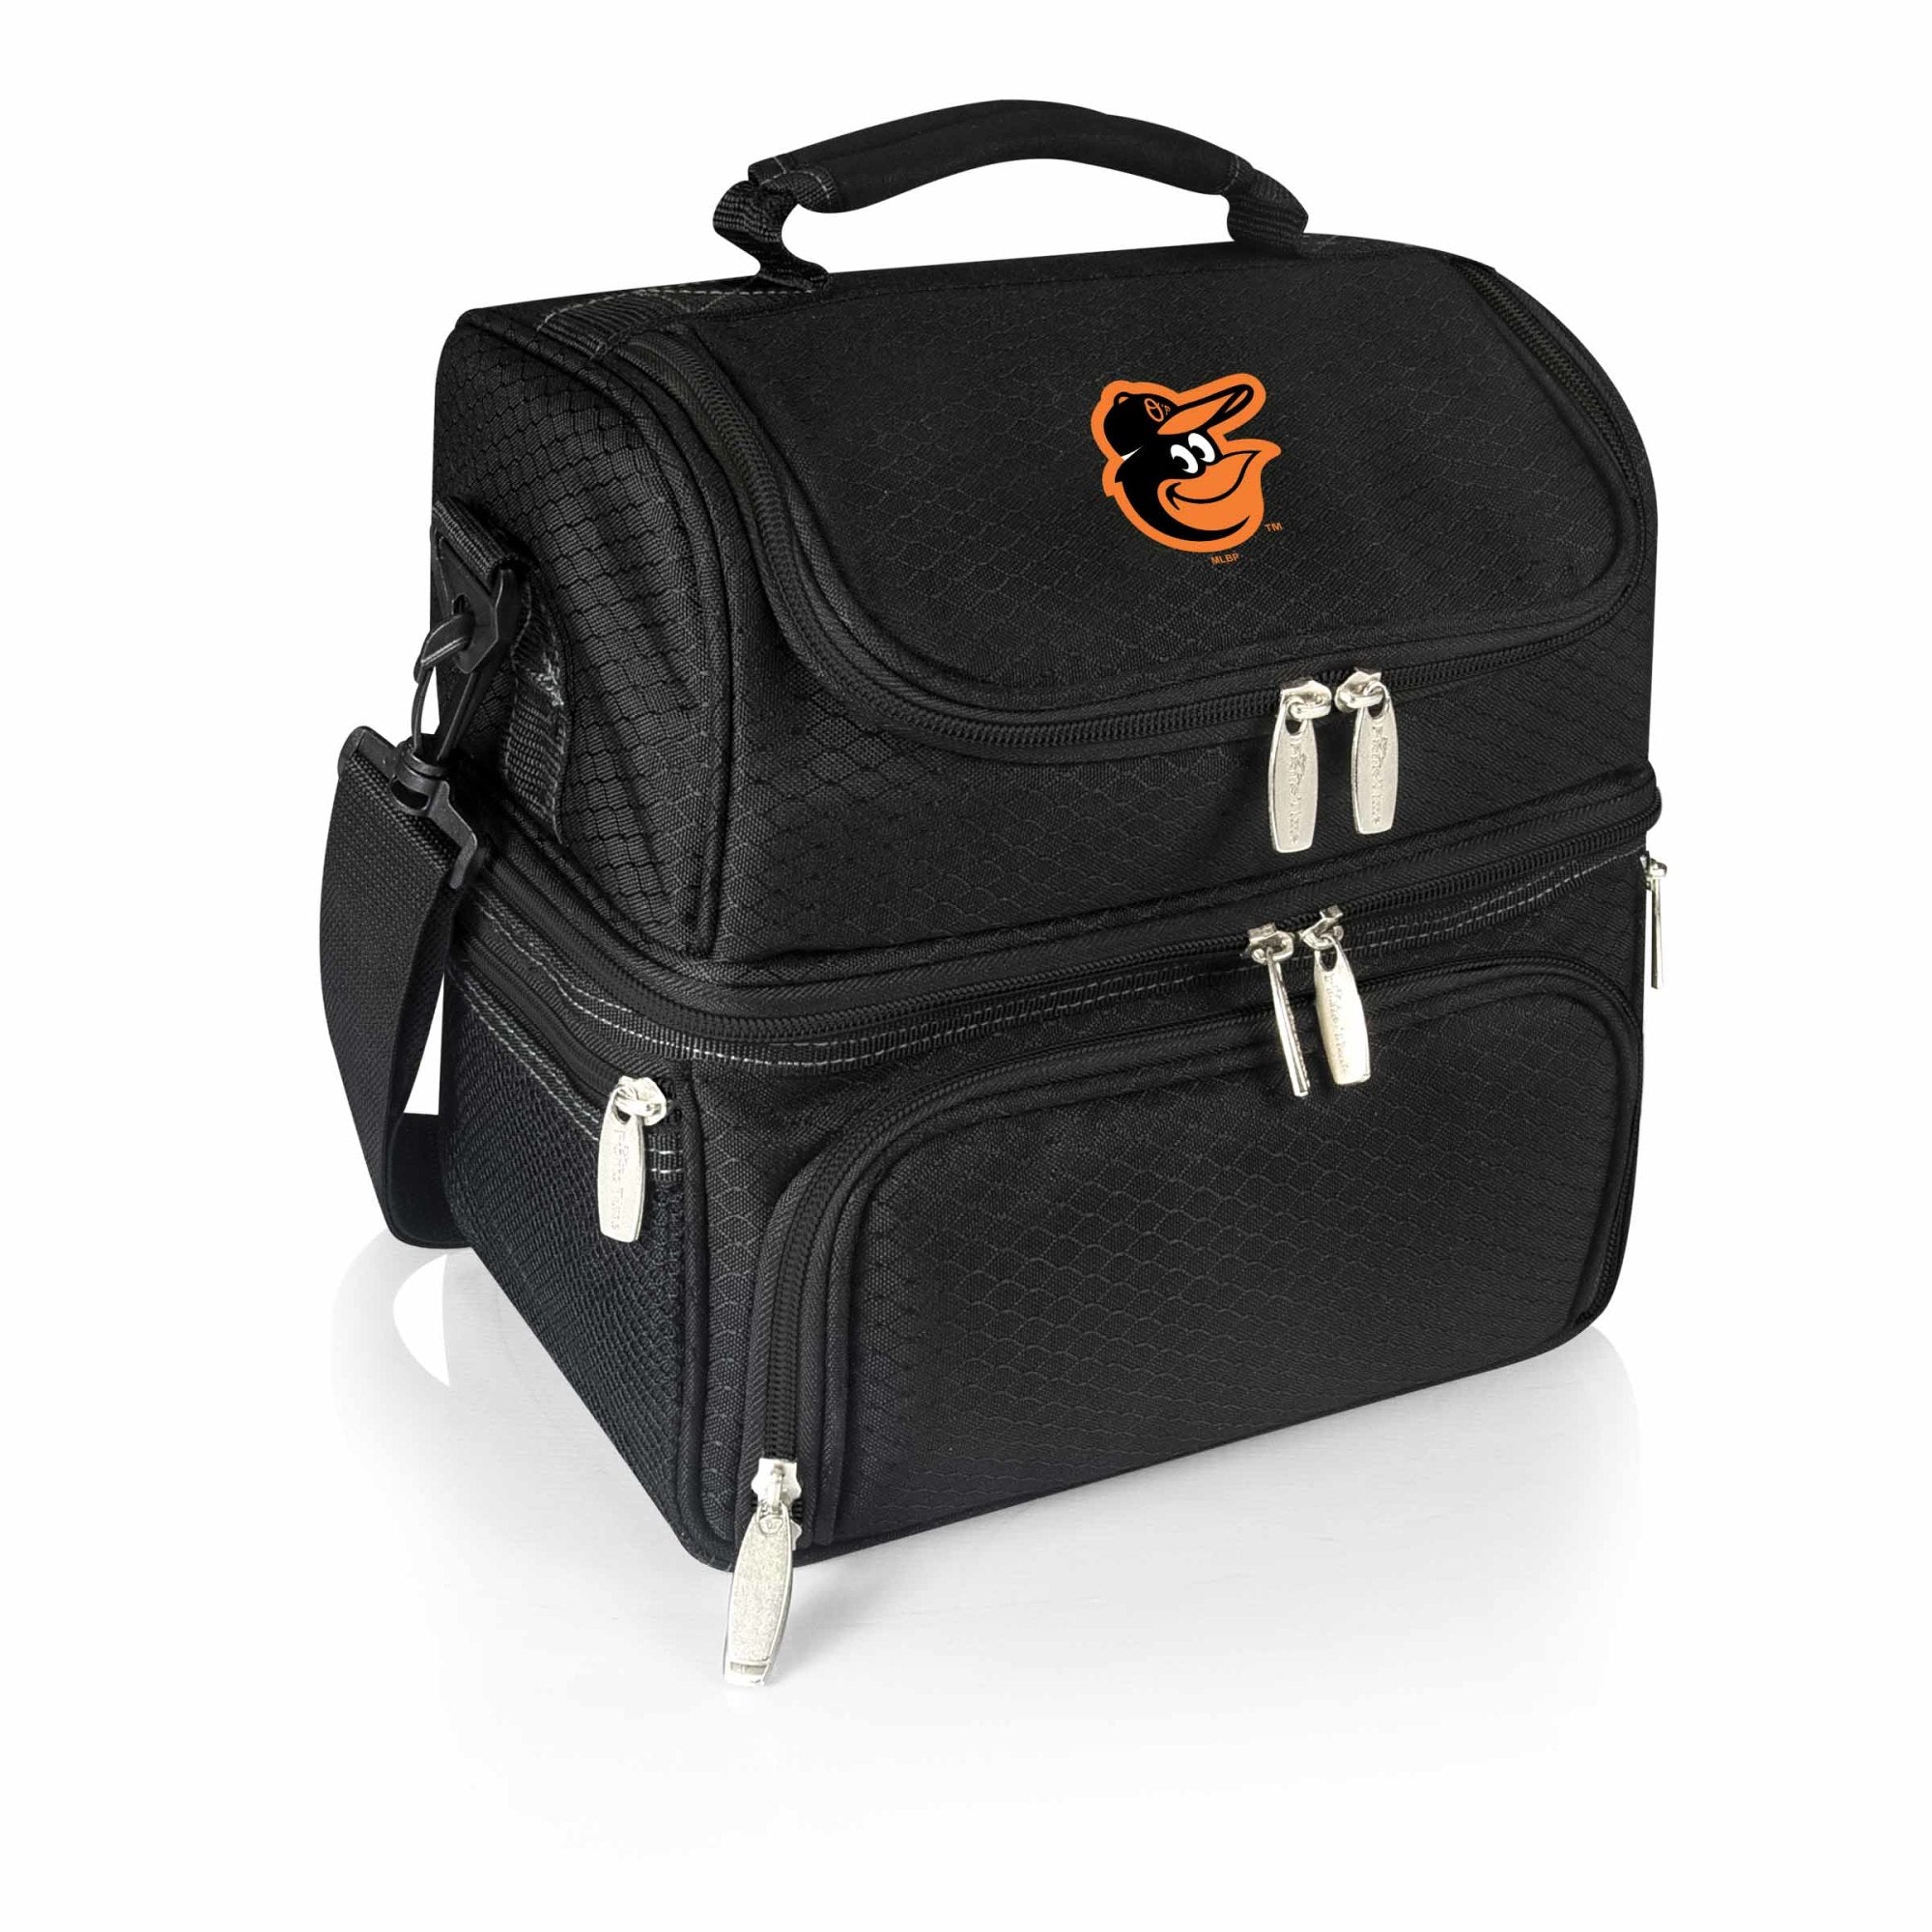 Baltimore Orioles - Pranzo Lunch Bag Cooler with Utensils